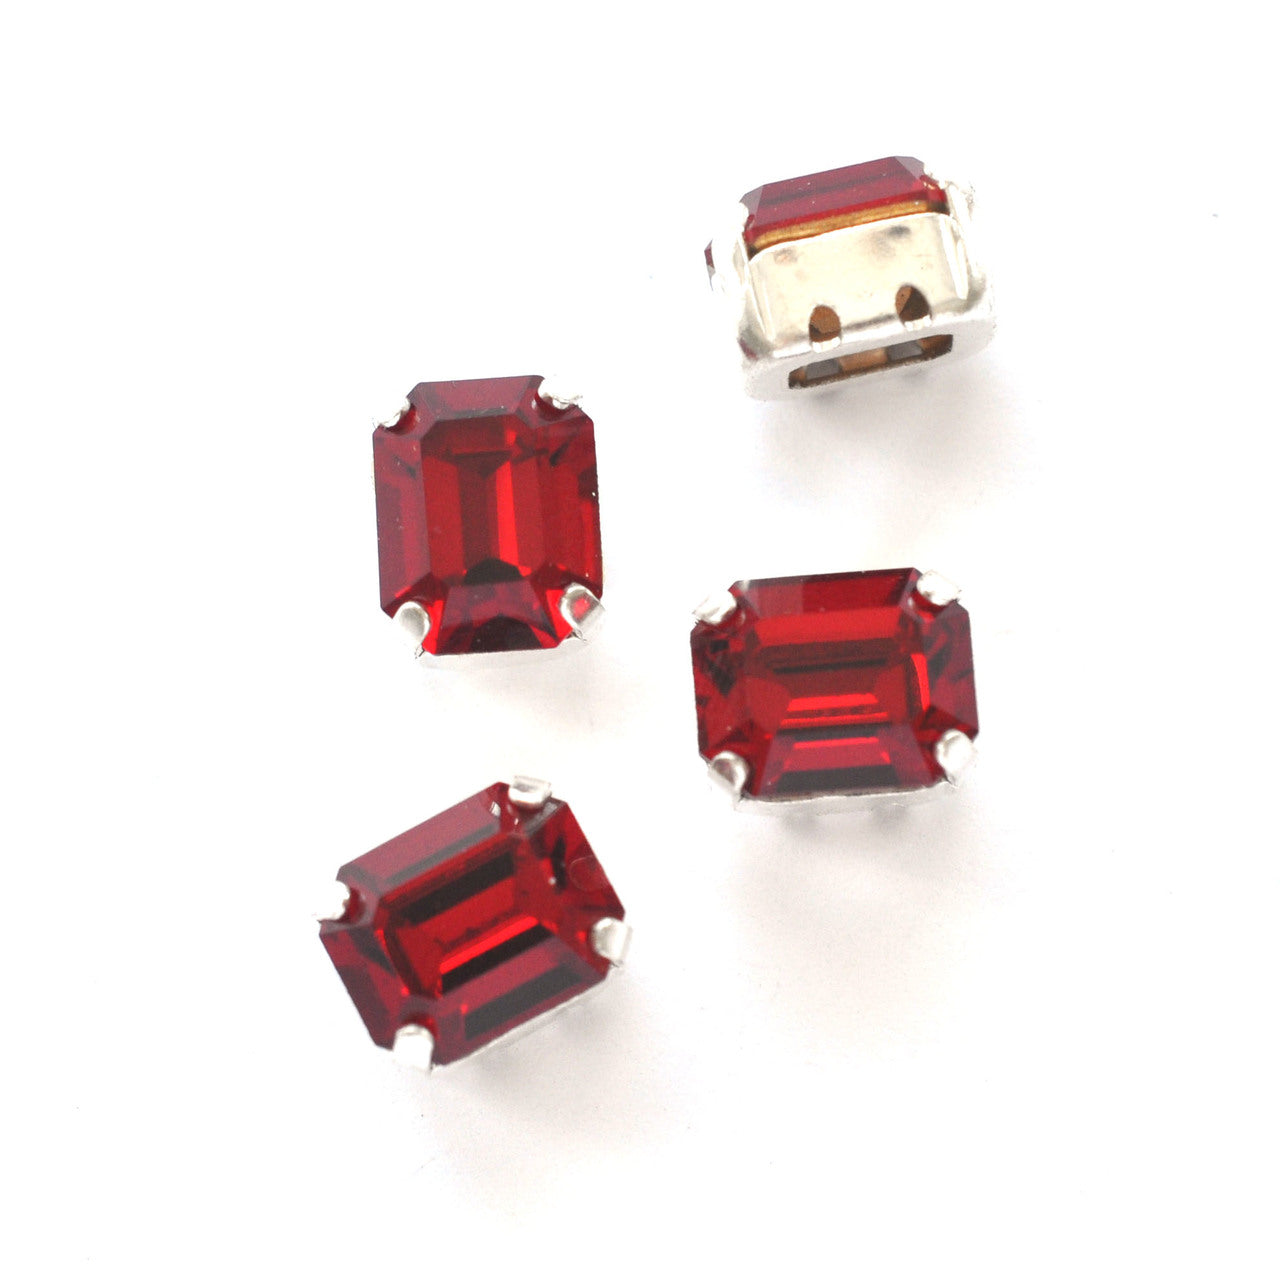 Siam 10x8mm Octagon Sew On Crystals - 4 Pieces